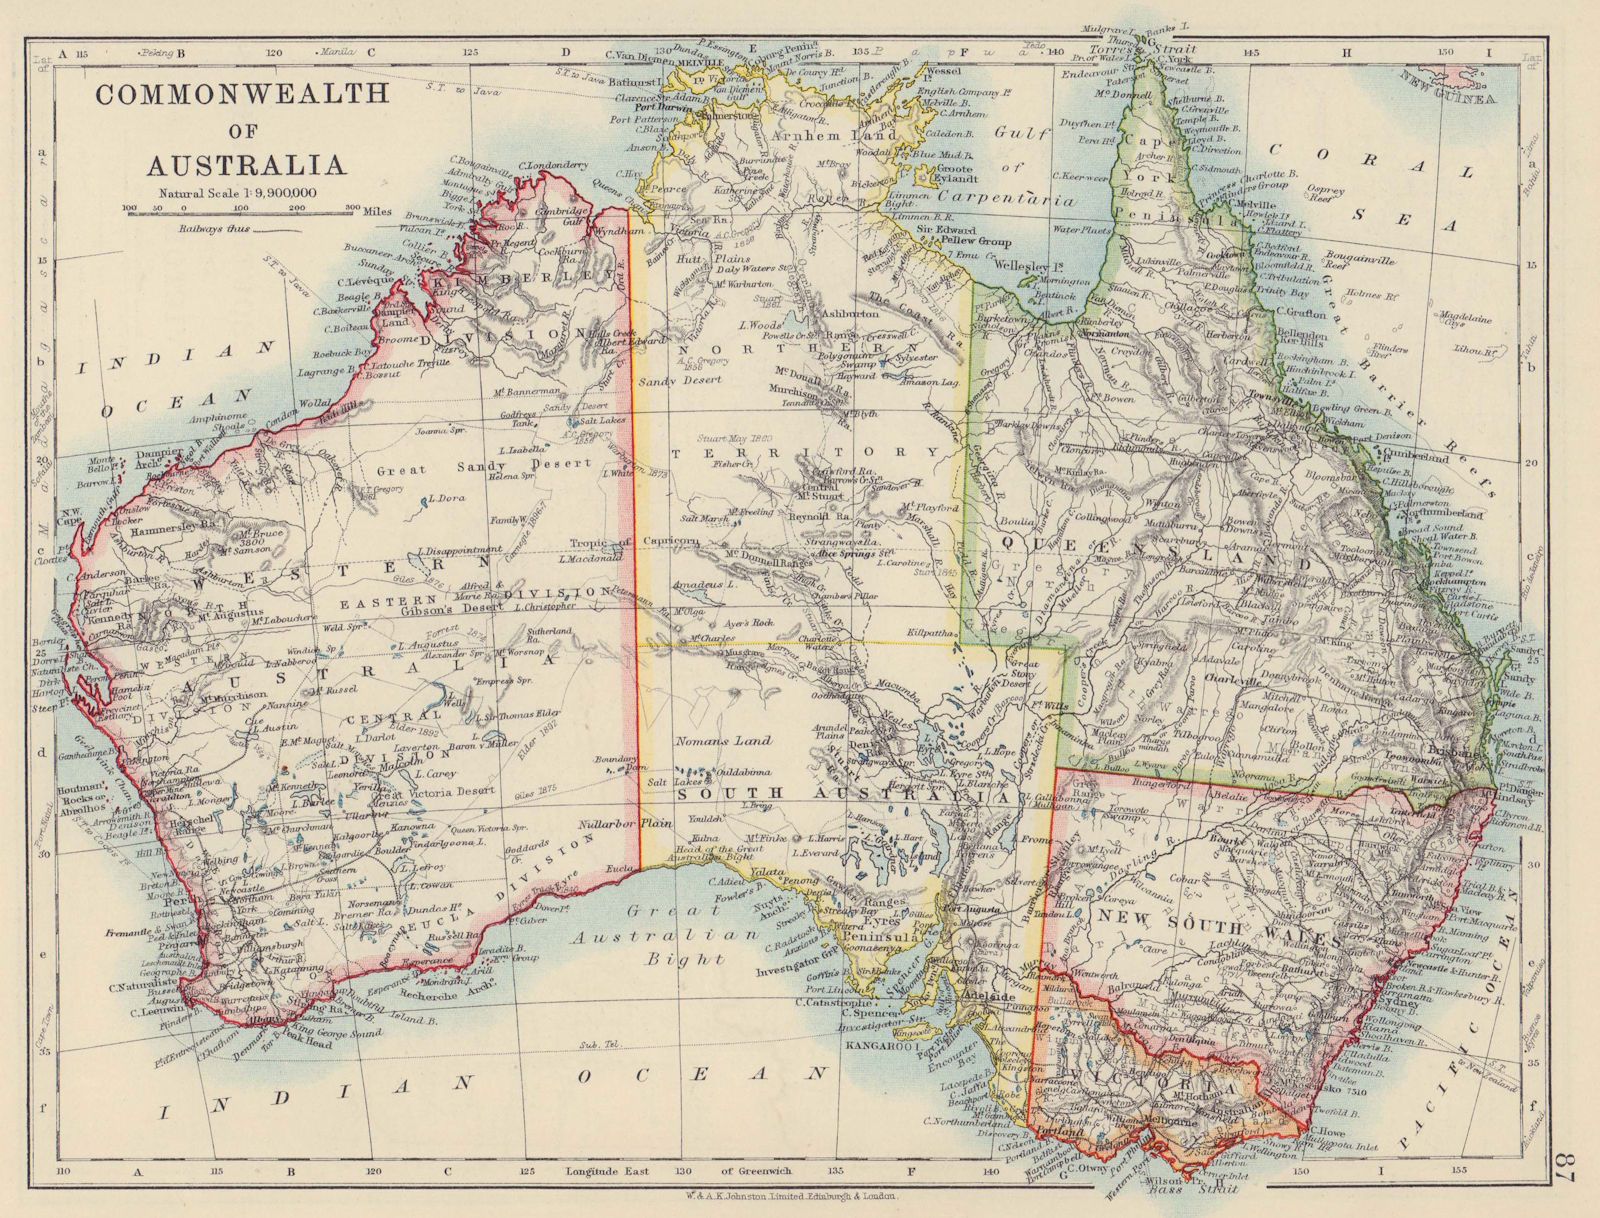 AUSTRALIA. States. Showing Northern Territory within SA. JOHNSTON 1910 old map